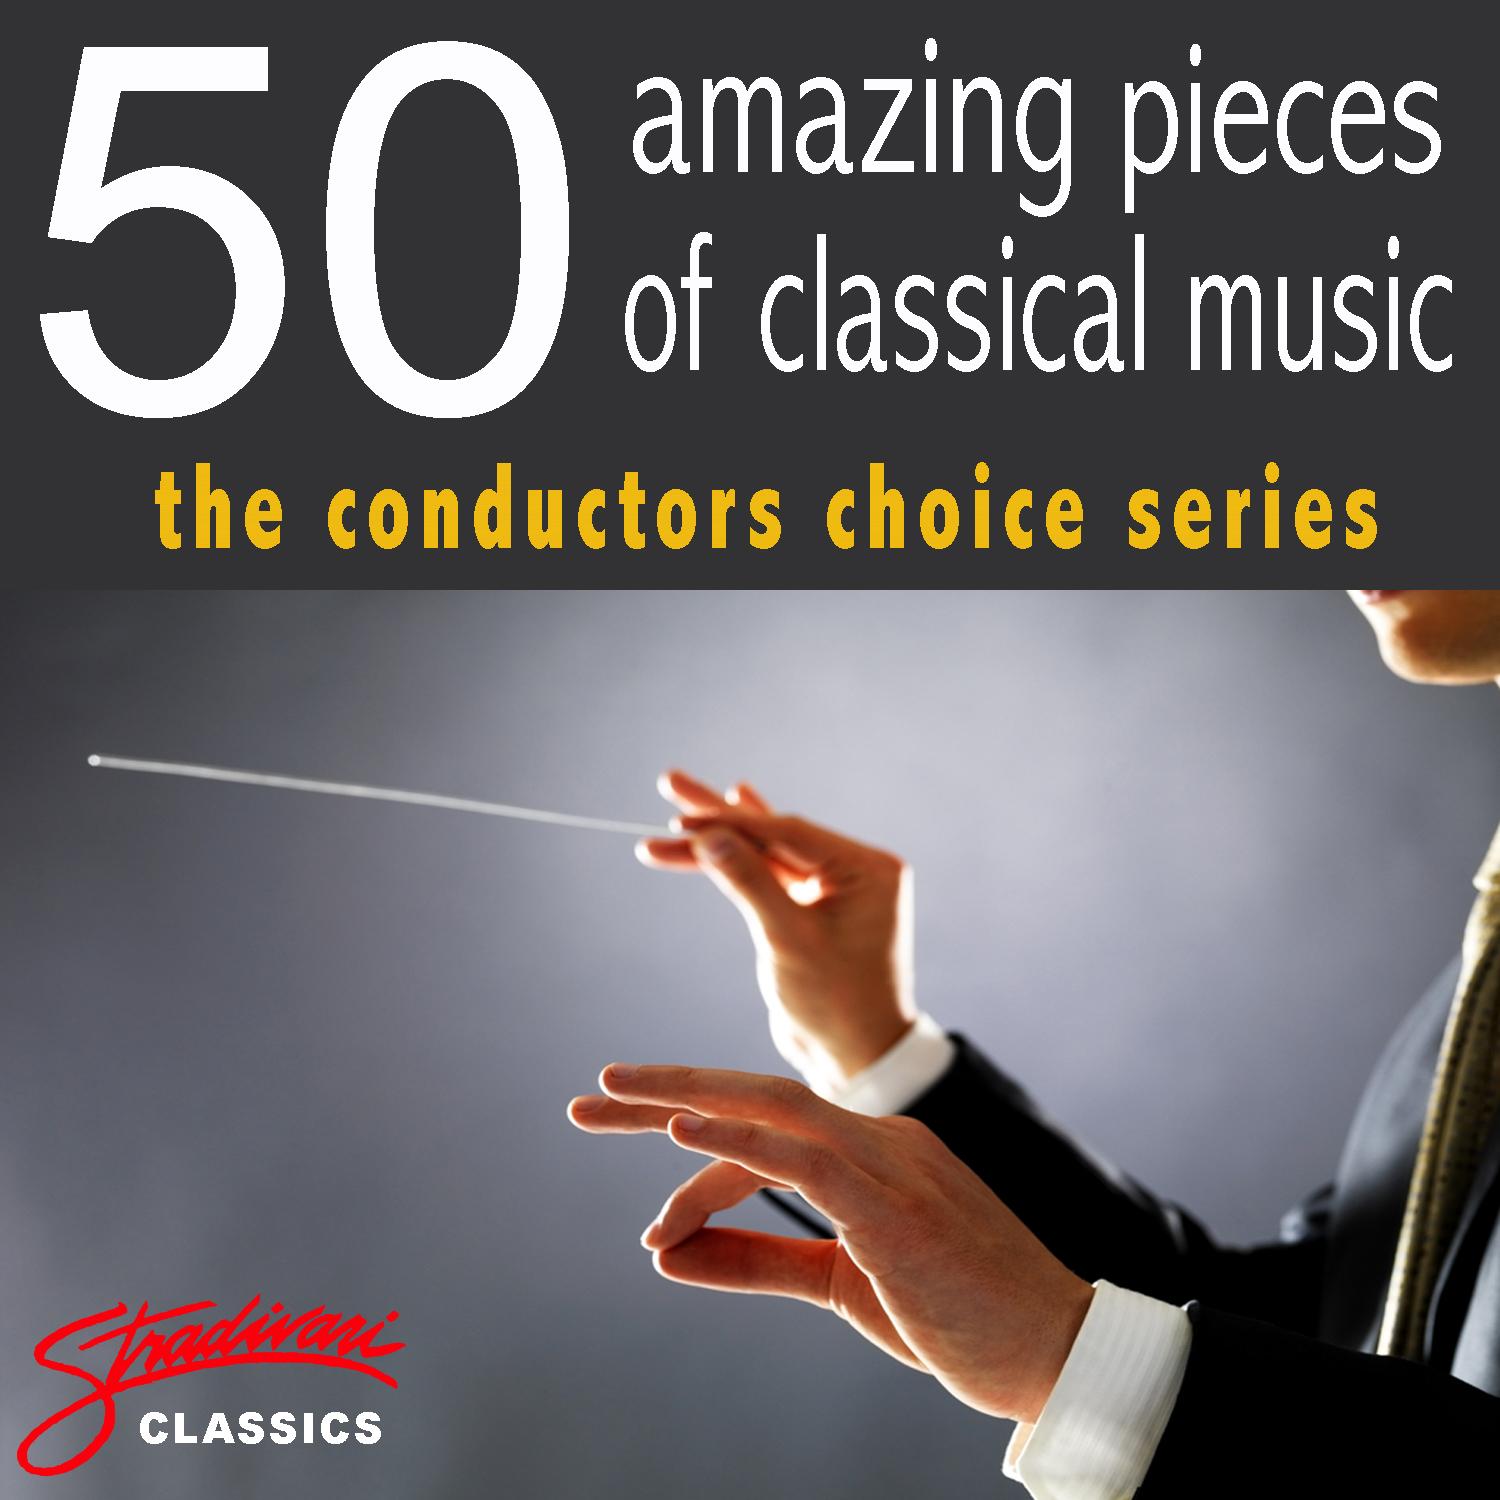 50 Amazing Pieces of Classical Music - The Conductors Choice Series